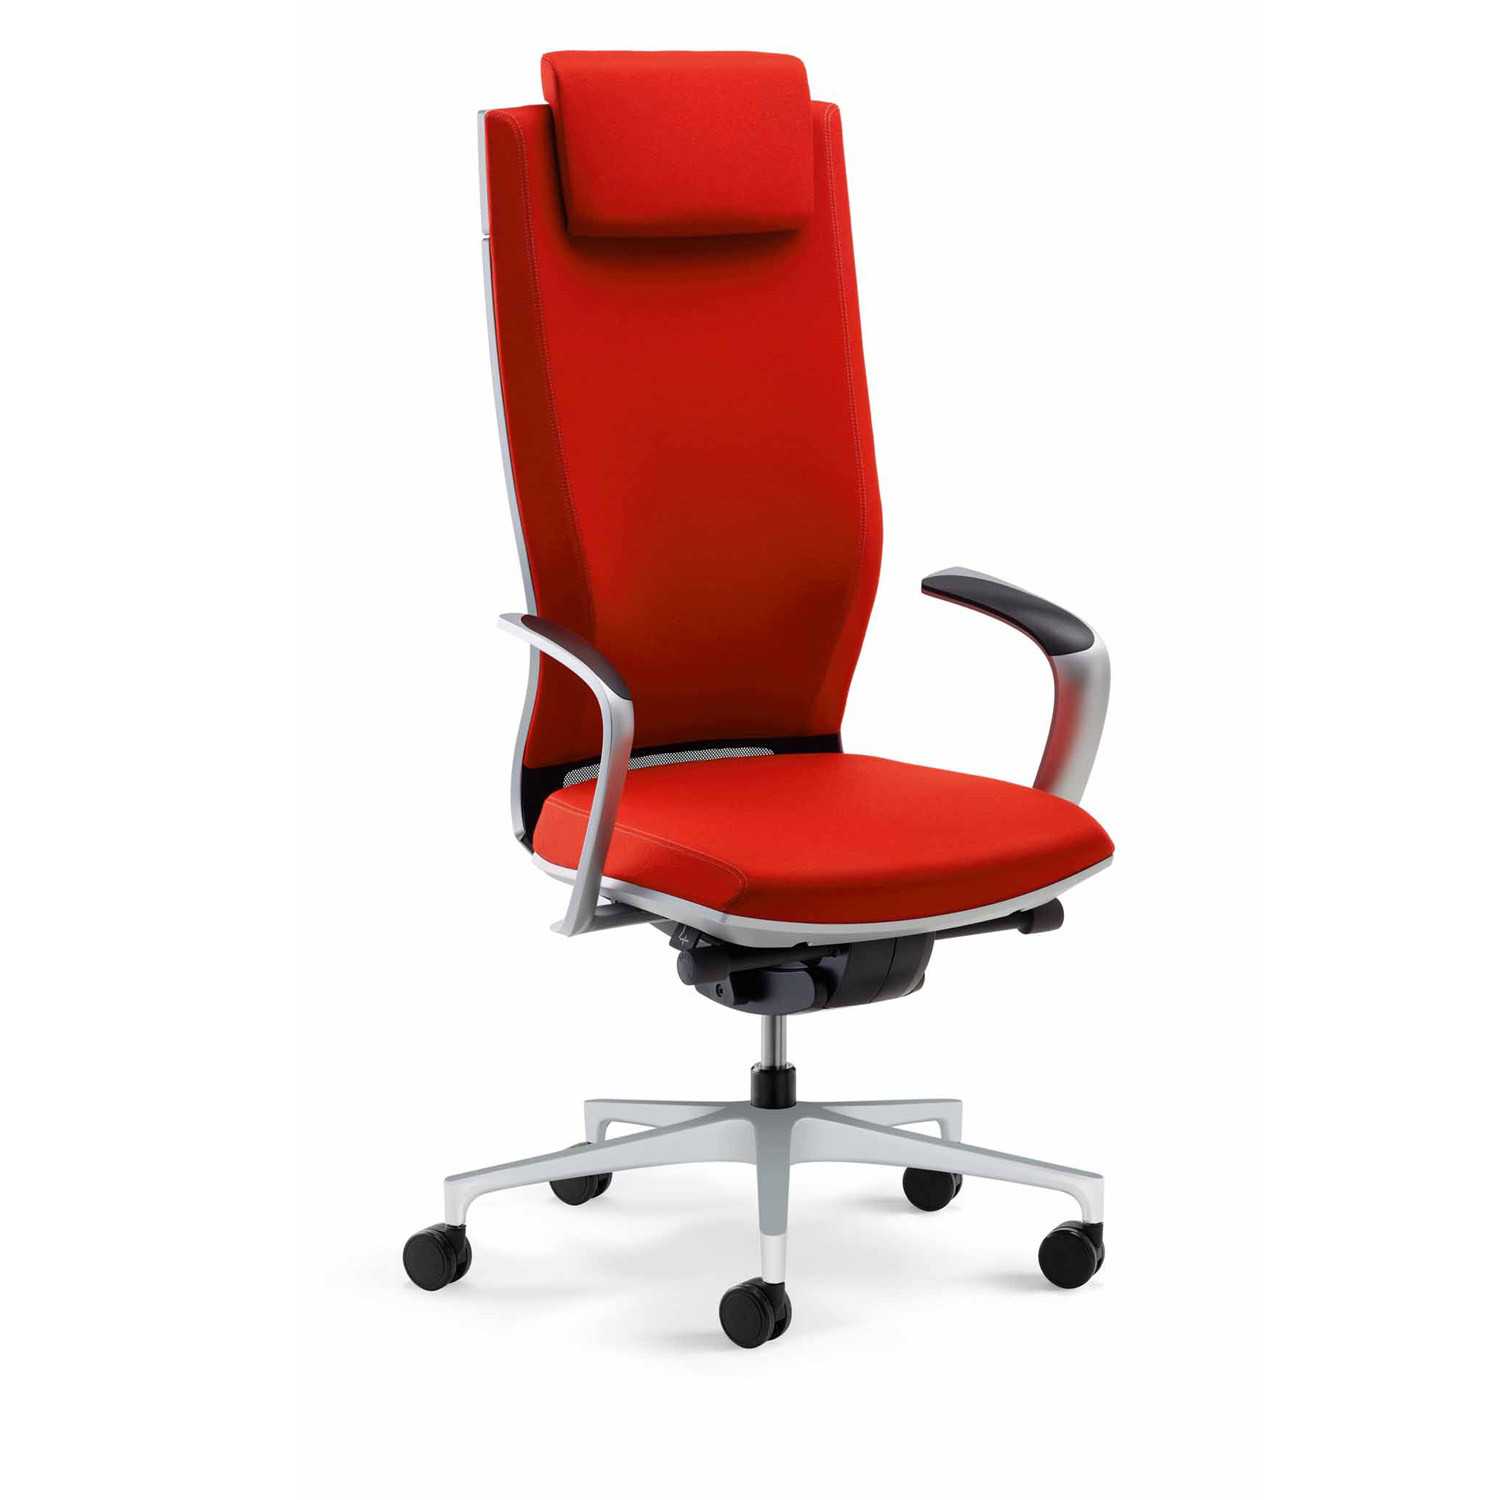 Moteo Executive Office Chairs